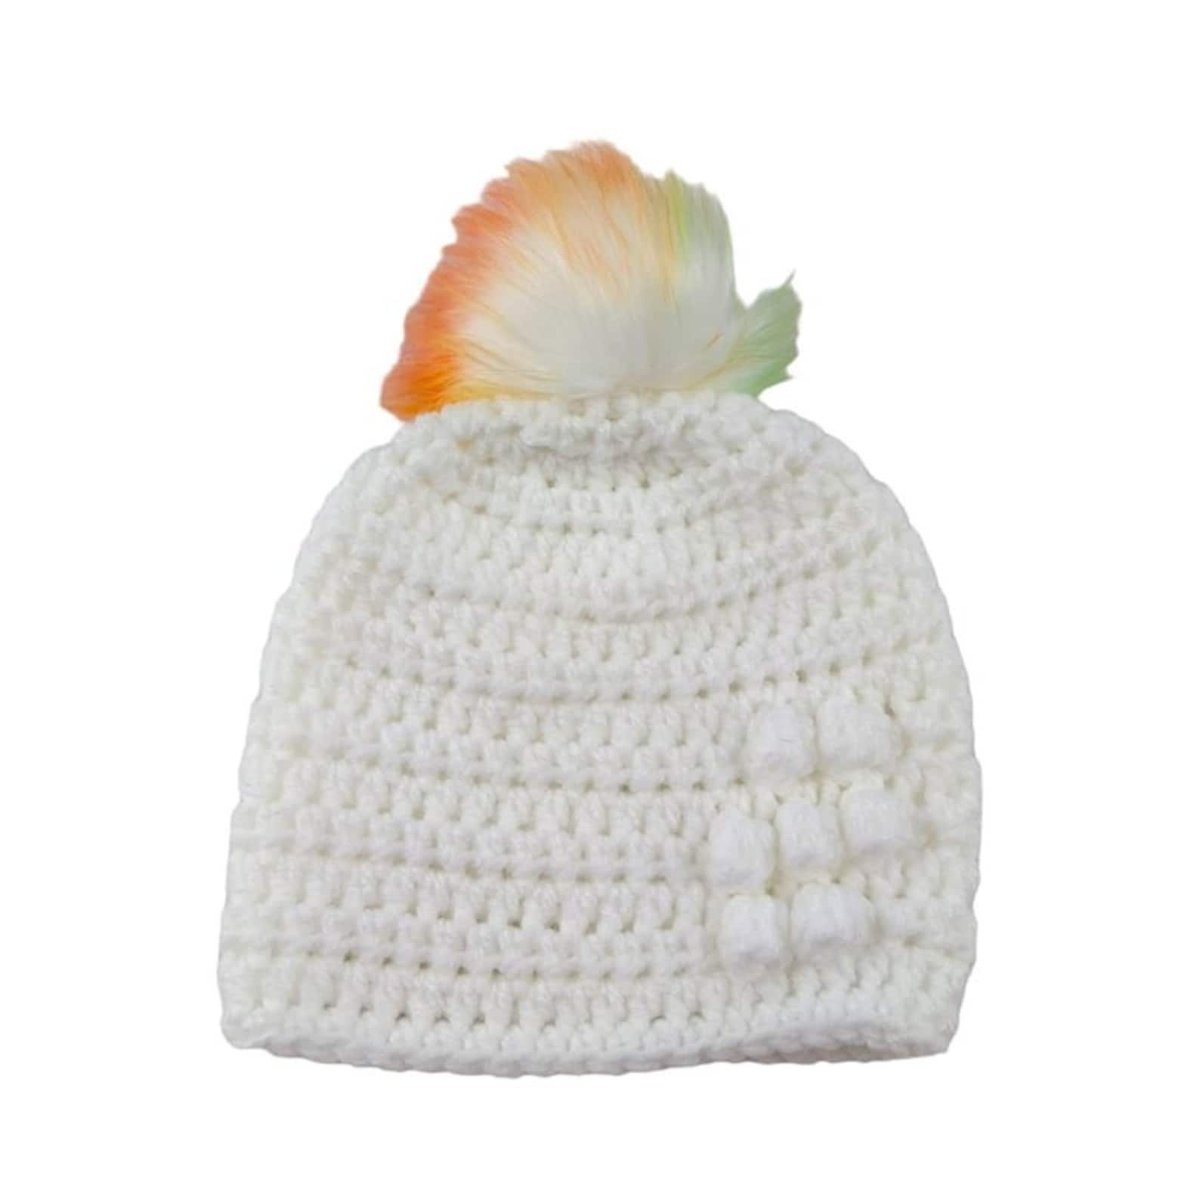 Keep your baby cosy with this crocheted hat! Its white faux fur pompom, adorned with colorful tips, is detachable. Plus, it has a cute flower detail. Perfect for your little one's wardrobe. #Handmade #BabyFashion knittingtopia.etsy.com/listing/167119… #knittingtopia #etsy #craftbizparty #MHHSBD